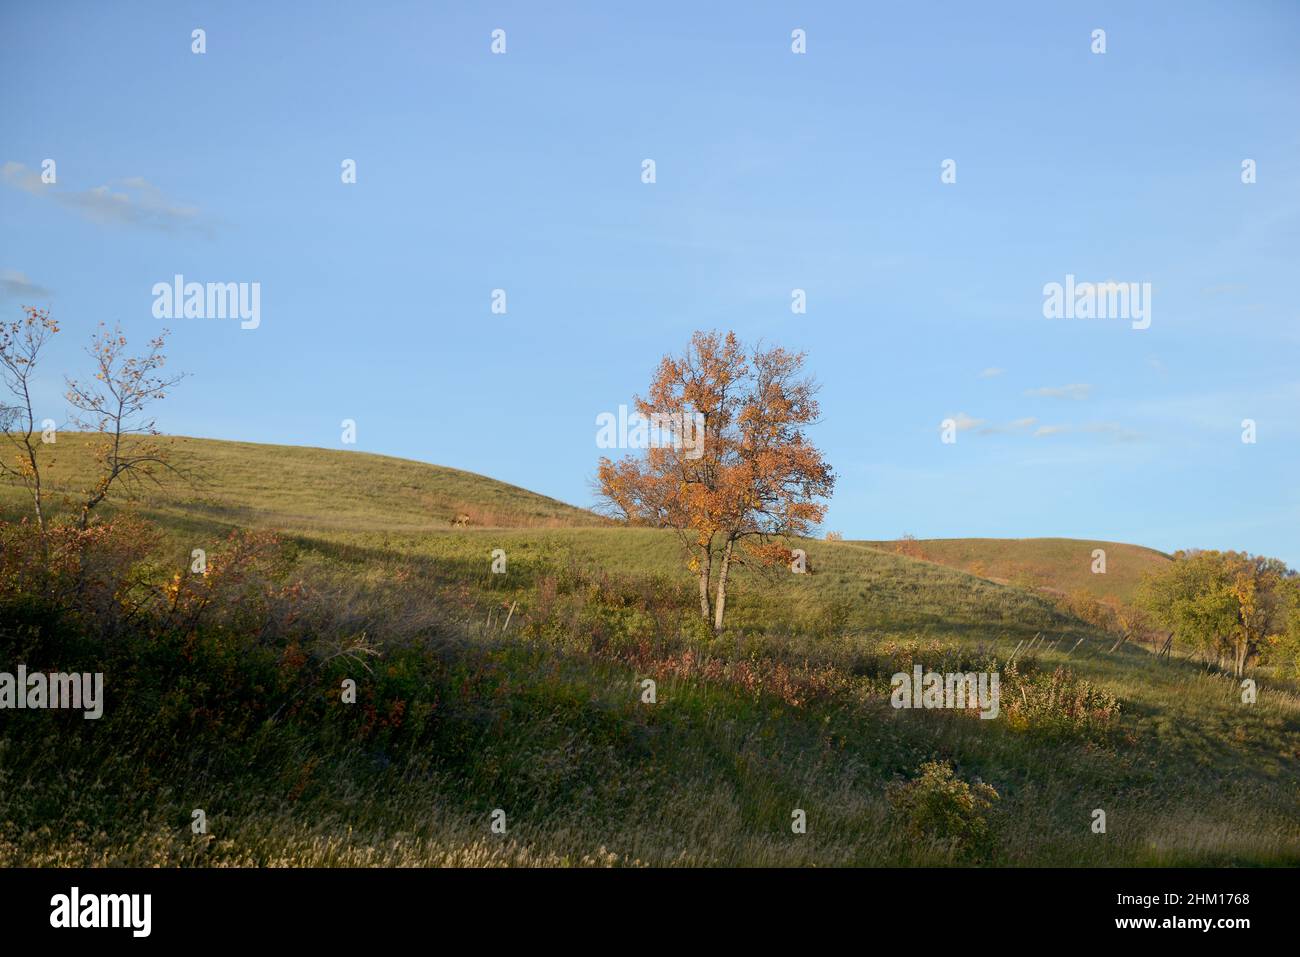 A lone tree and a deer grazing on a field filled with fall colours Stock Photo